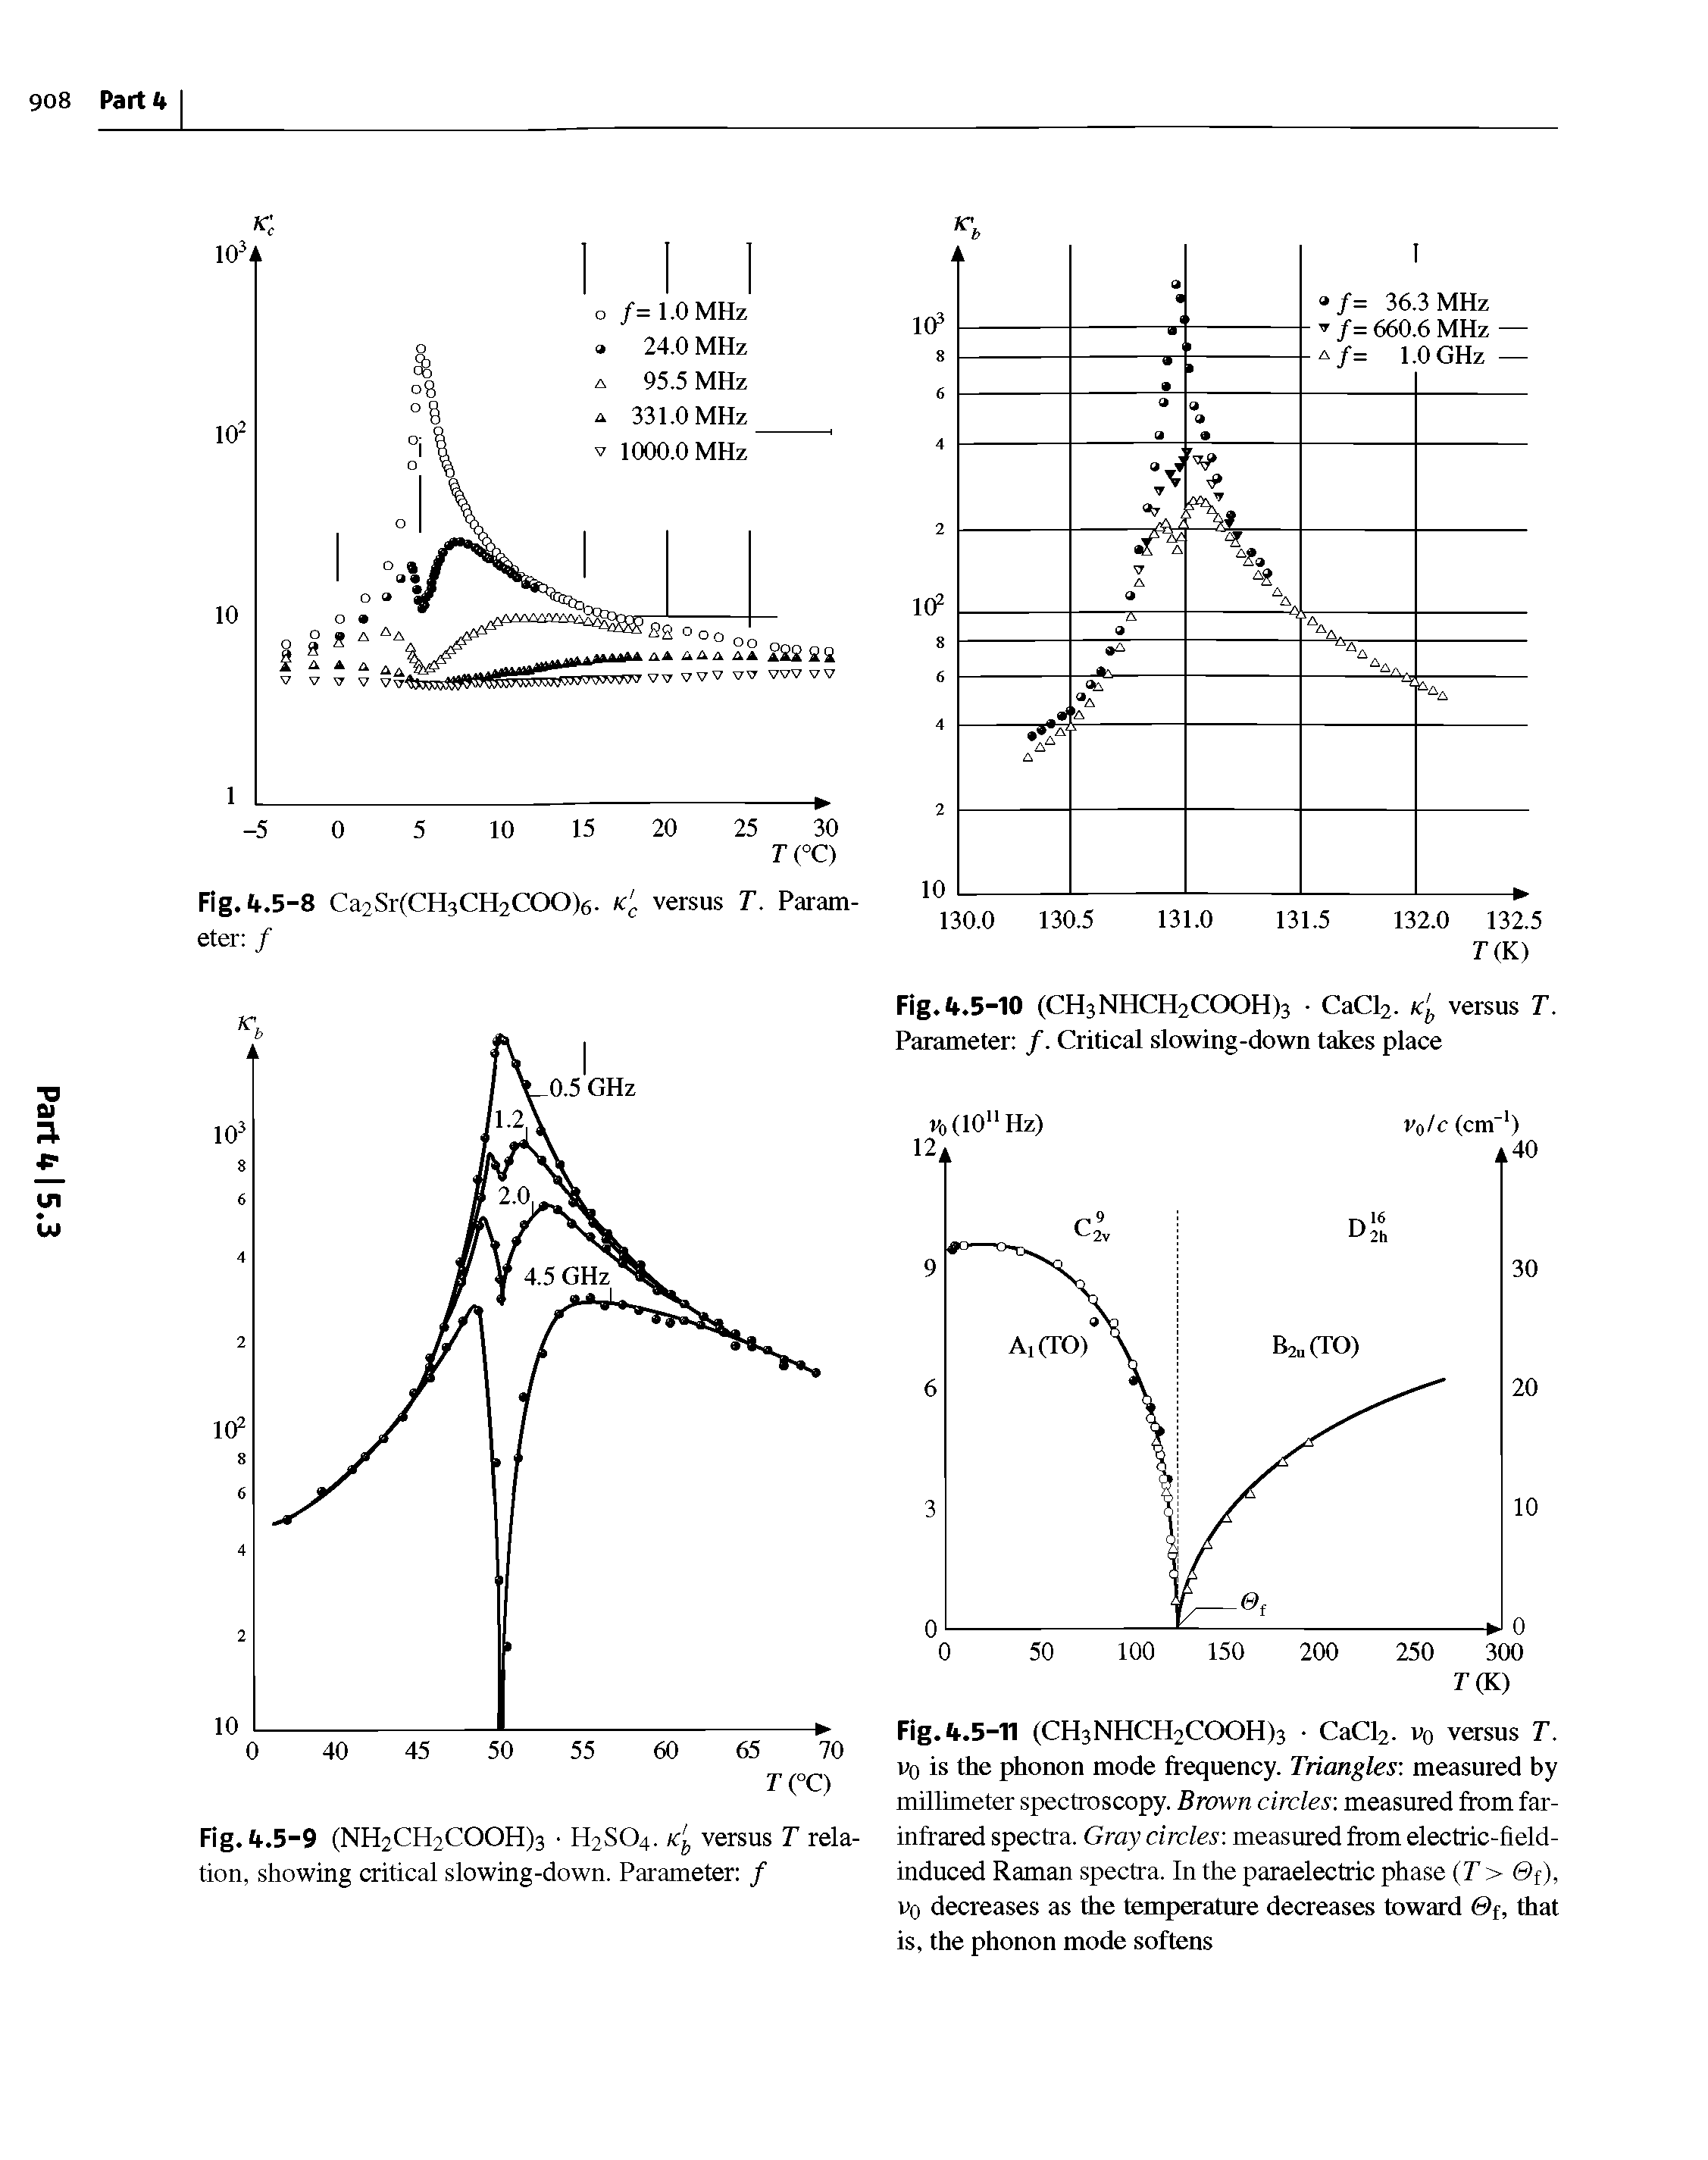 Fig.4.5-TI (CH3NHCH2C00H)3 CaCl2. vq versus T. Vo is the phonon mode frequency. Triangles measured by millimeter spectroscopy. Brown circles measured from far-infrared spectra. Gray circles measured from electric-field-induced Raman spectra. In the paraelectric phase T > 0f), Vo decreases as the temperature decreases toward 0f, that is, the phonon mode softens...